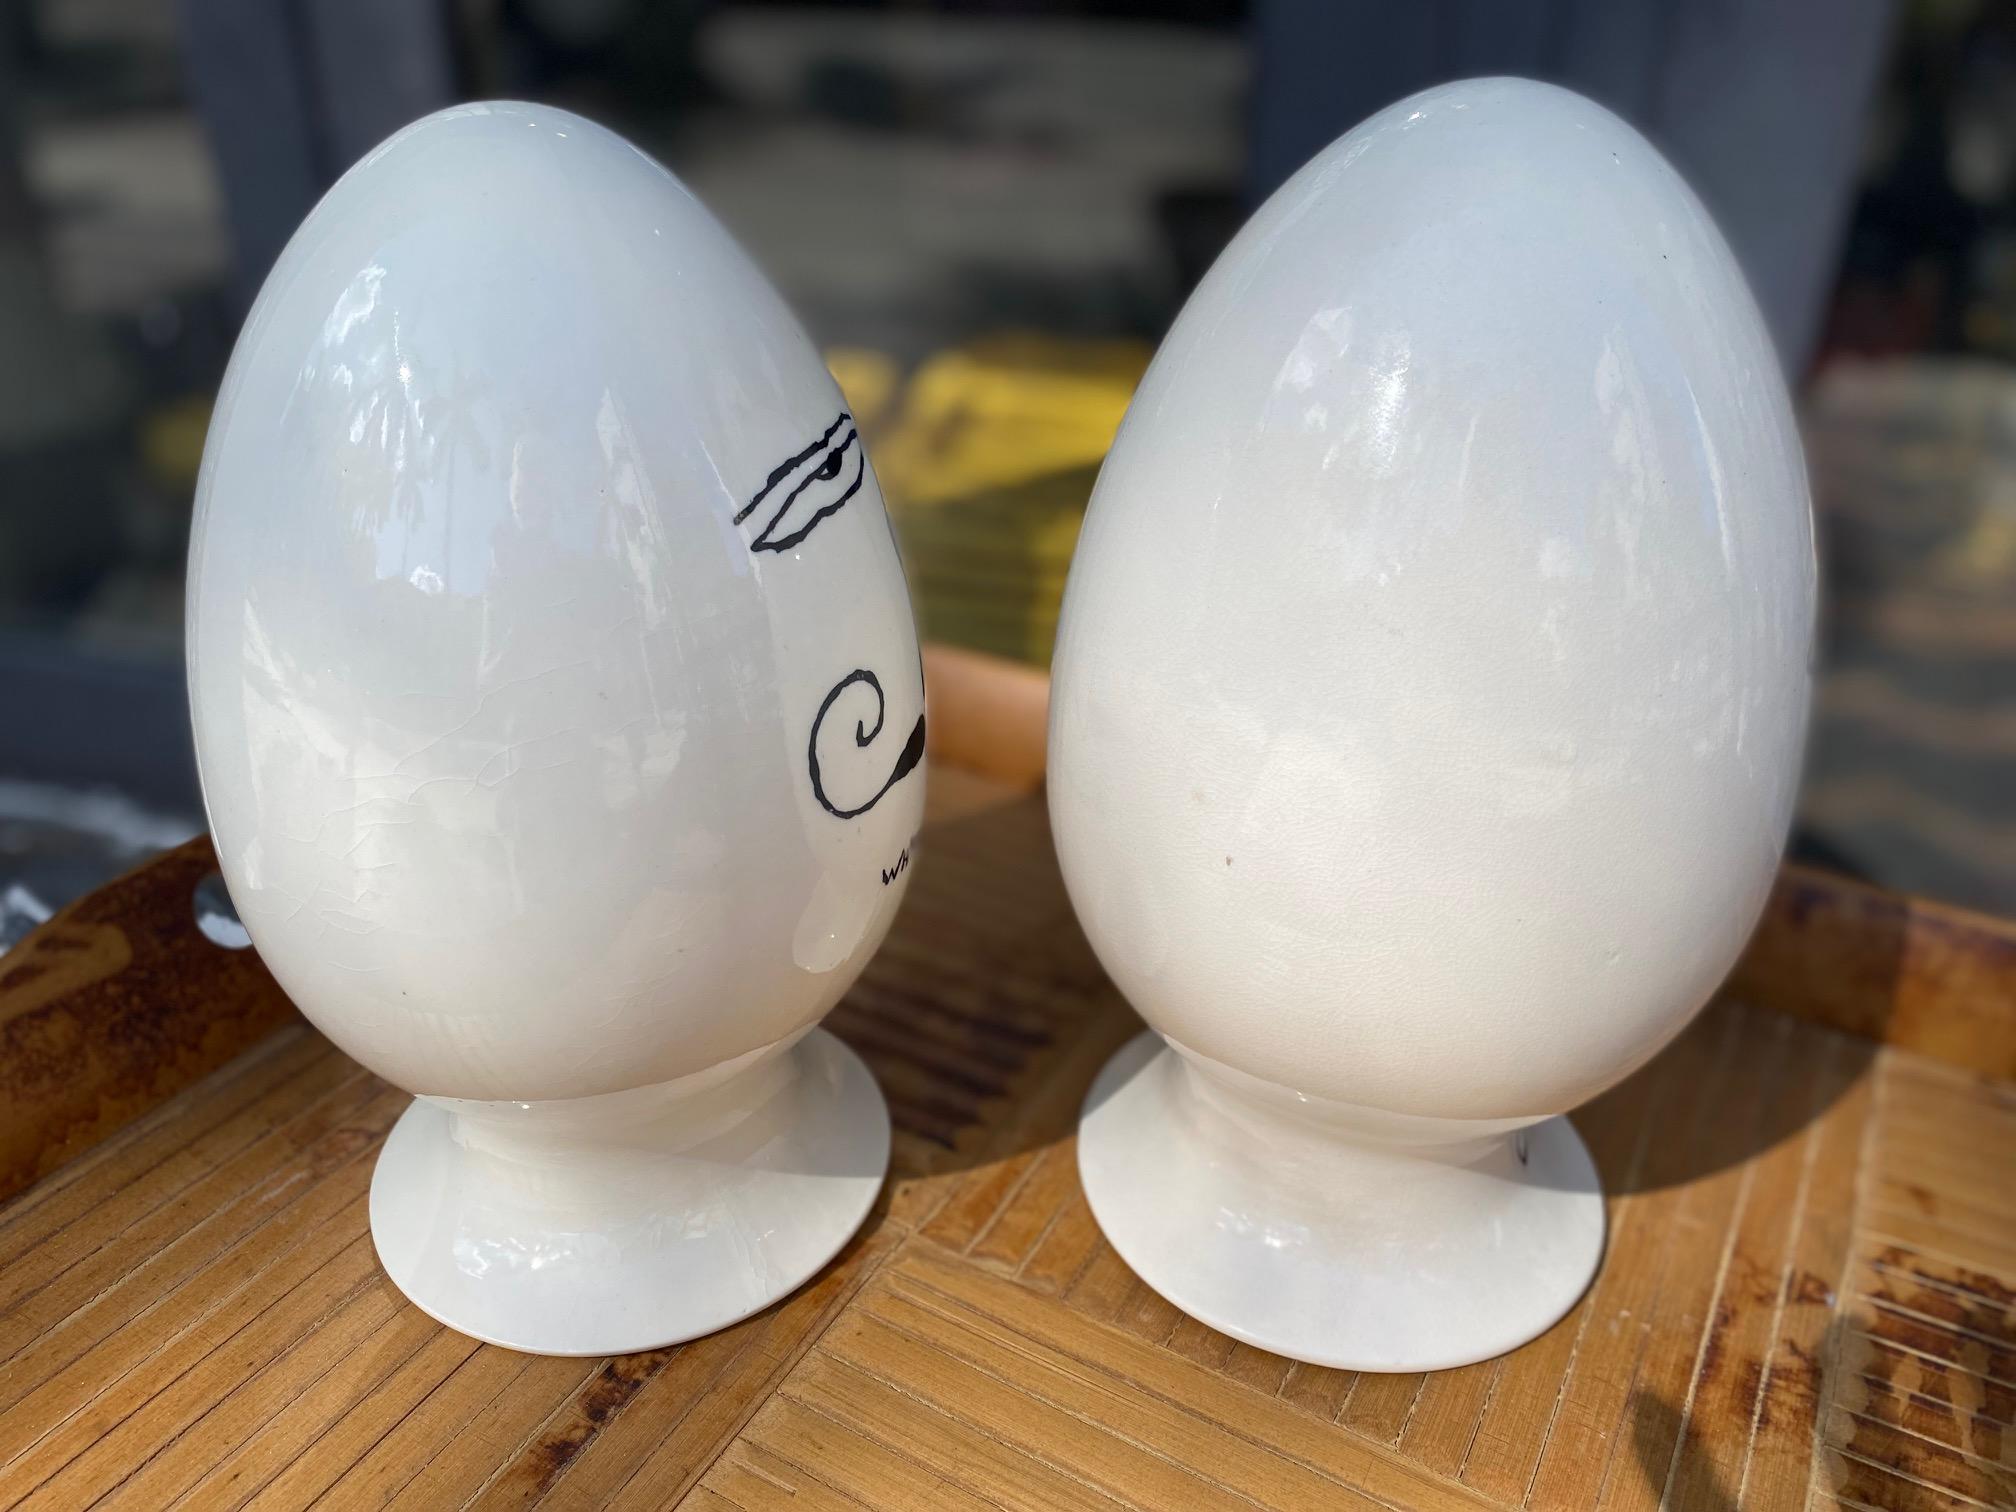 Pair of Rare Midcentury Playboy Egghead Condom Containers In Good Condition For Sale In Sarasota, FL